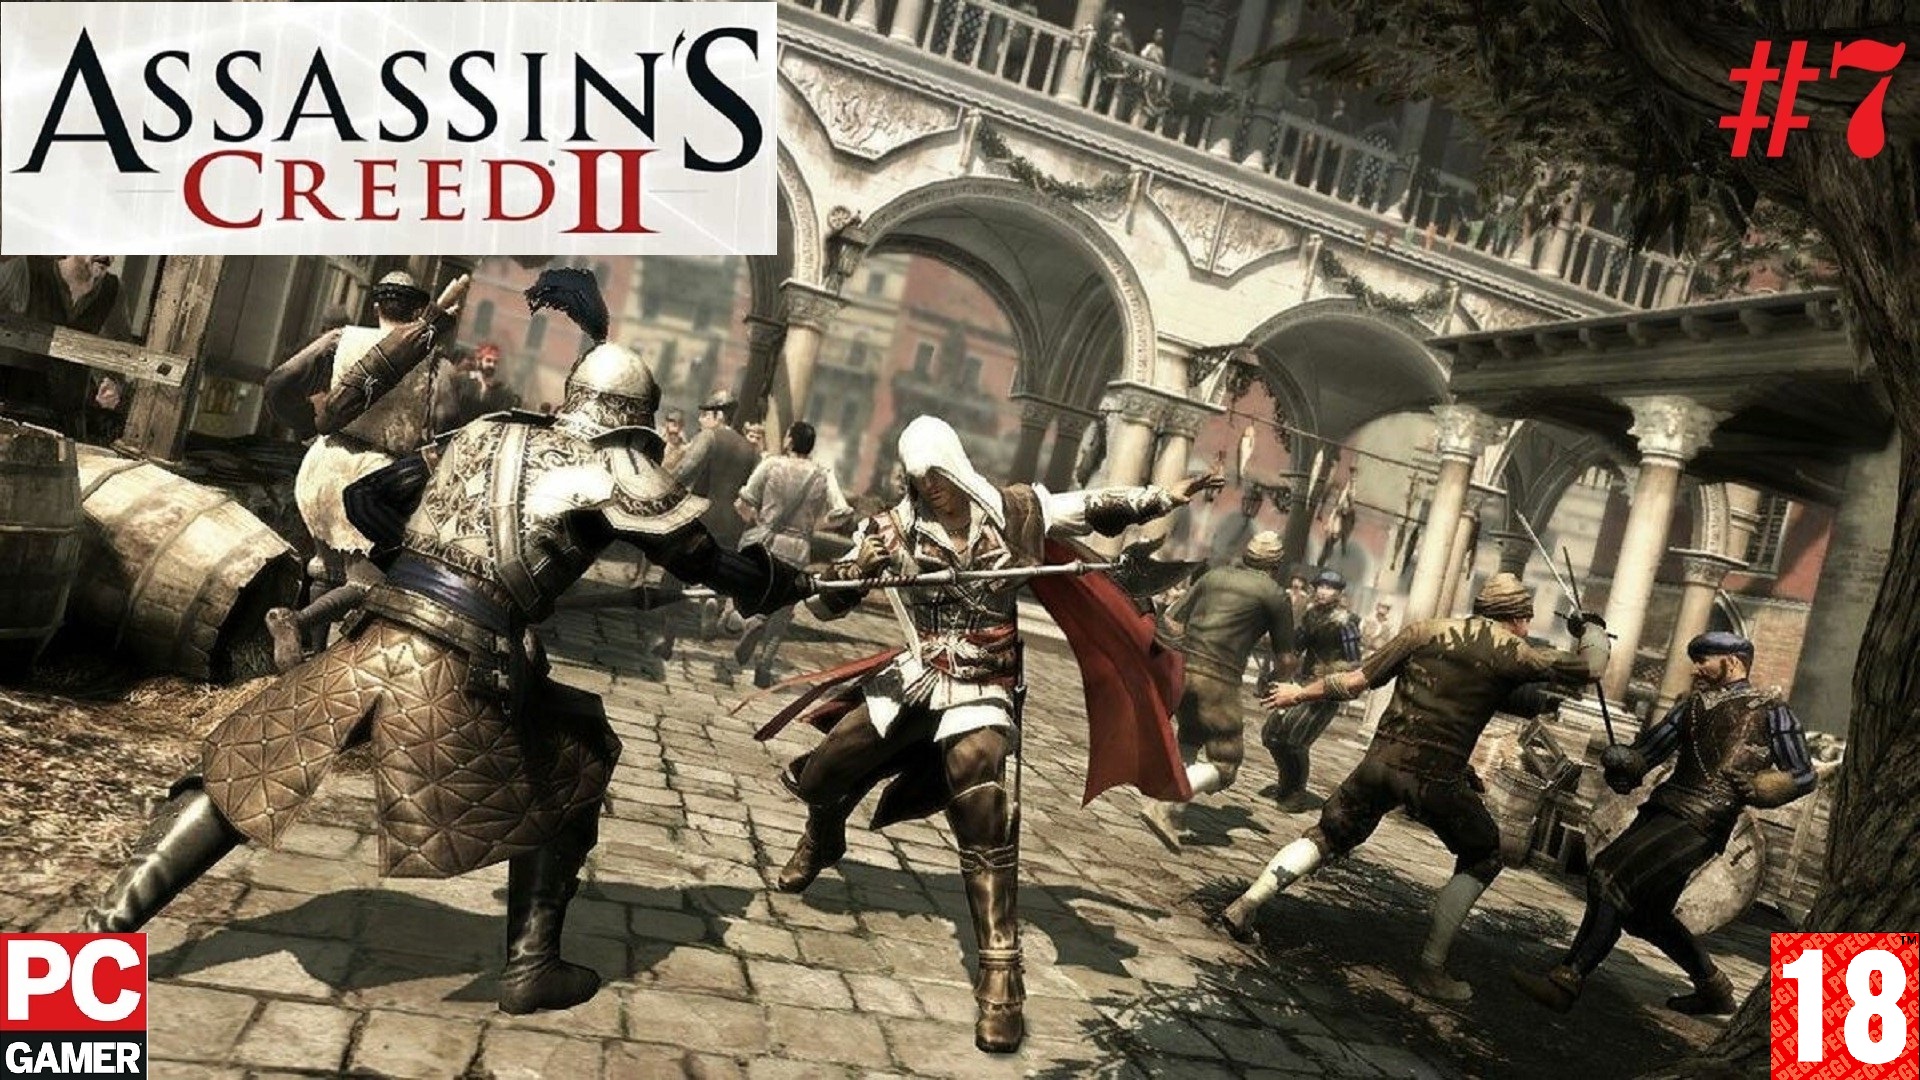 Assasın creed 2. Ассасин Крид 2. Assassins Creed 2 [ps3]. Assassin's Creed 2 ps3 Скриншоты. Assassin’s Creed II – 2009.